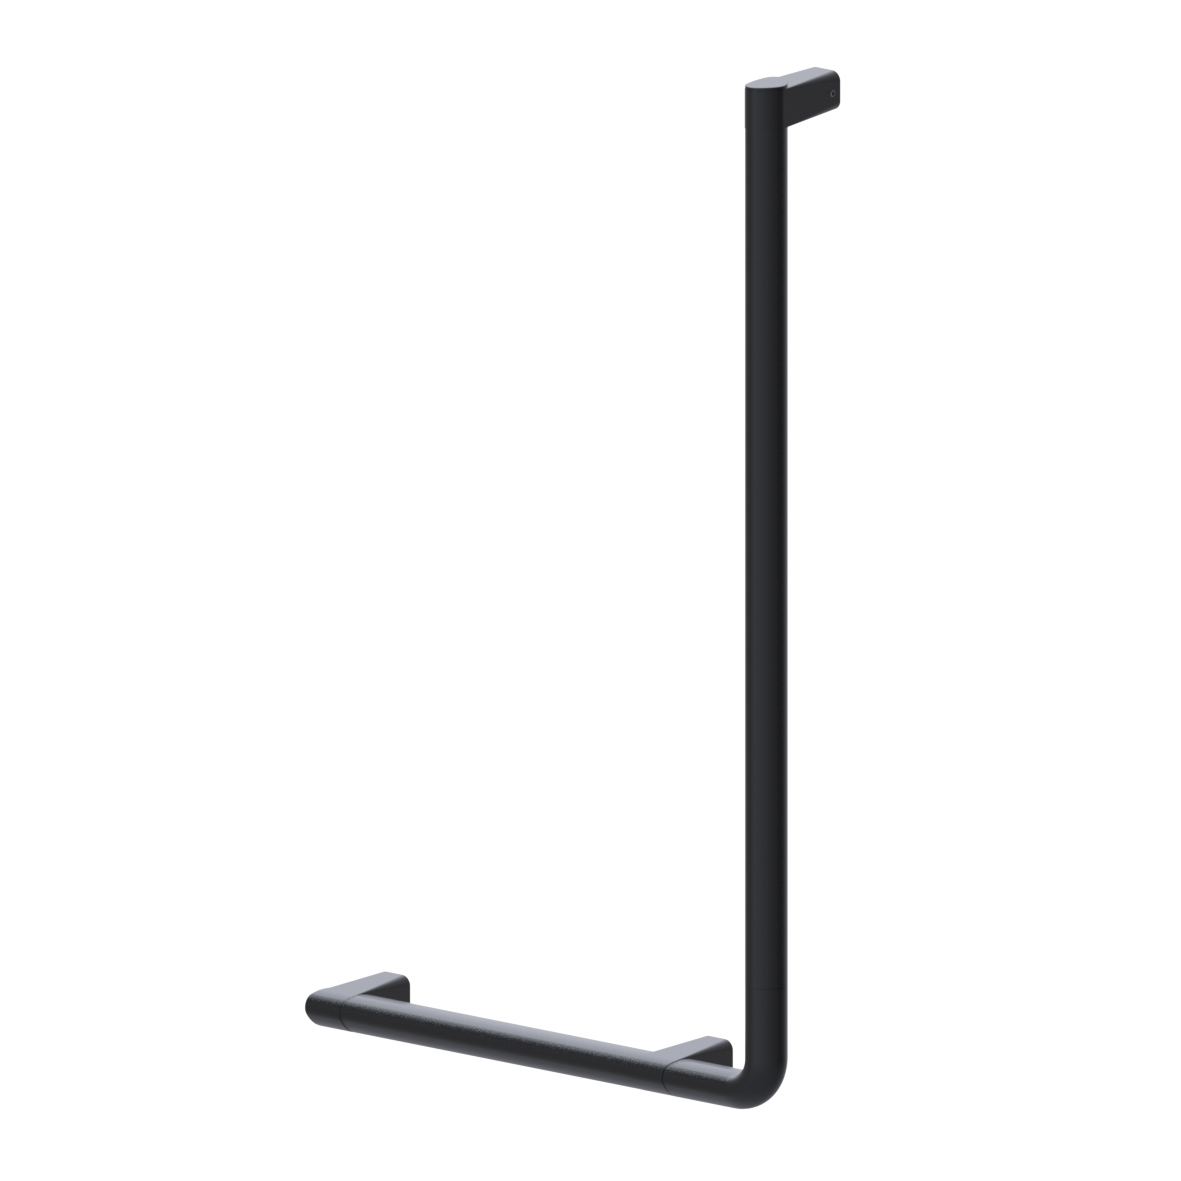 Cavere Care Grab rail, 90°, right, 400 x 750 mm, single-point mounting, Cavere Carbon black